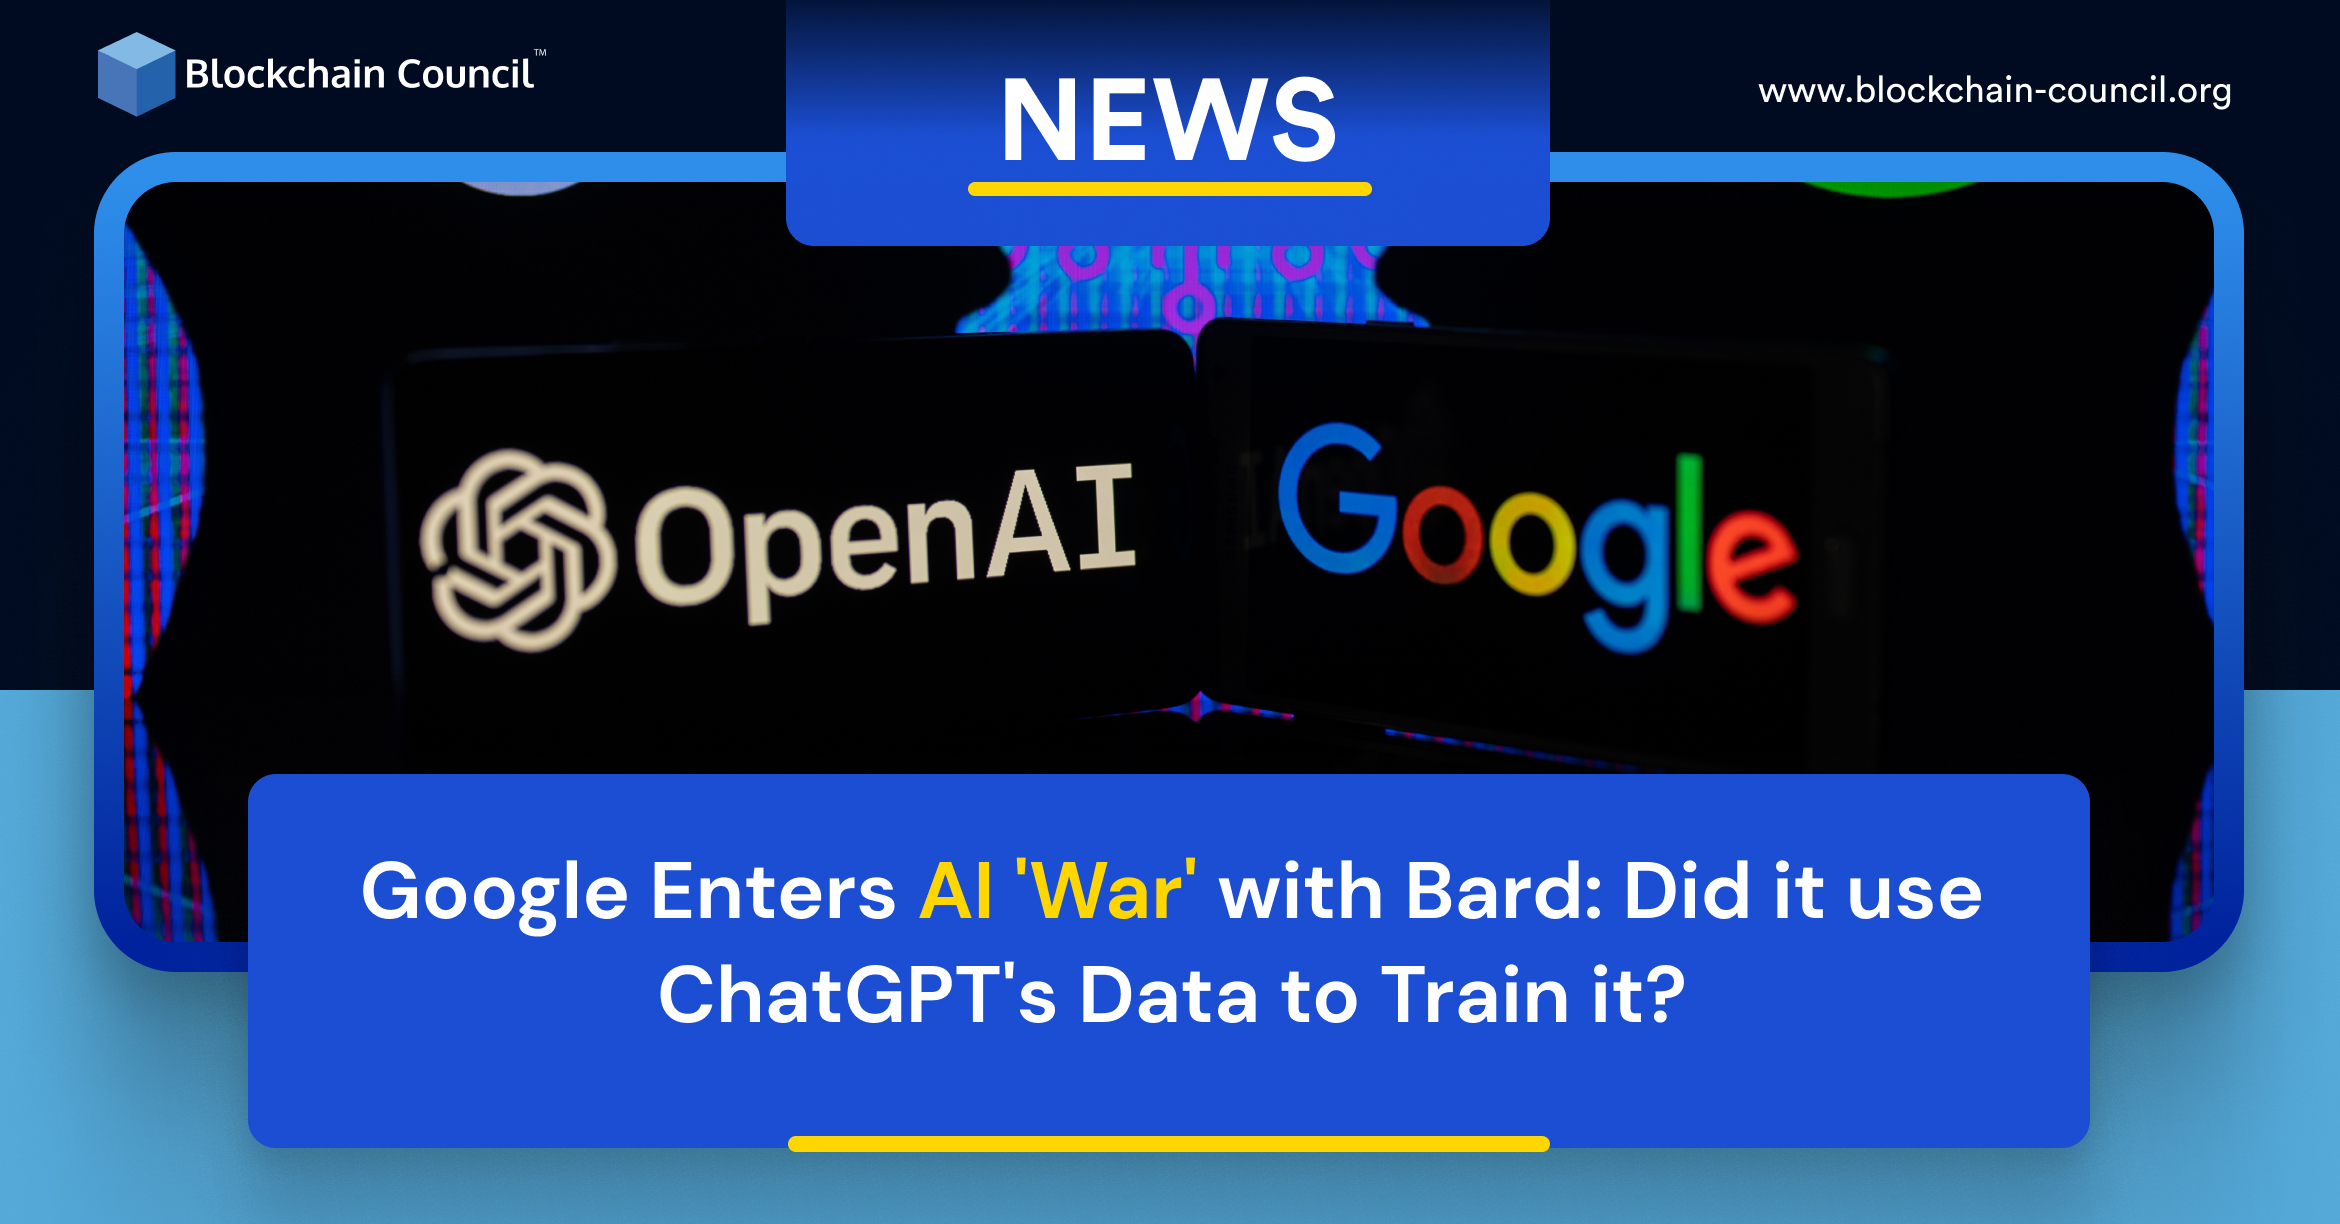 Did it use ChatGPT's Data to Train it?